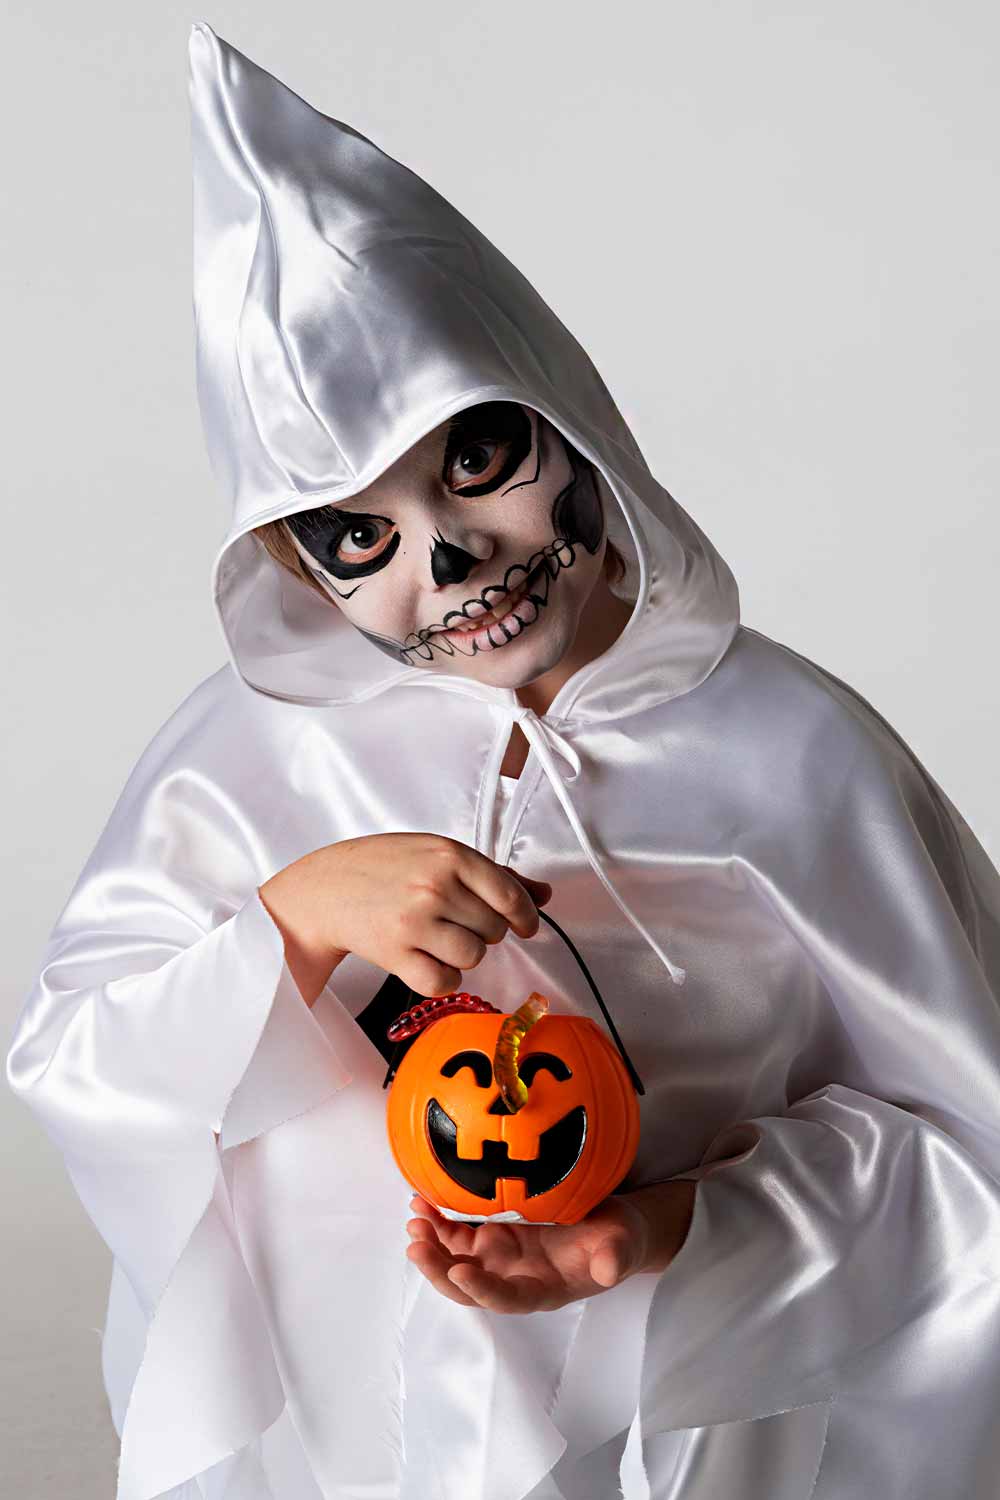 Ghost Halloween Costumes For 10 Year Olds Boy #boyshalloweencostumes #halloweencostumeforboy #boyscostumeforhalloween